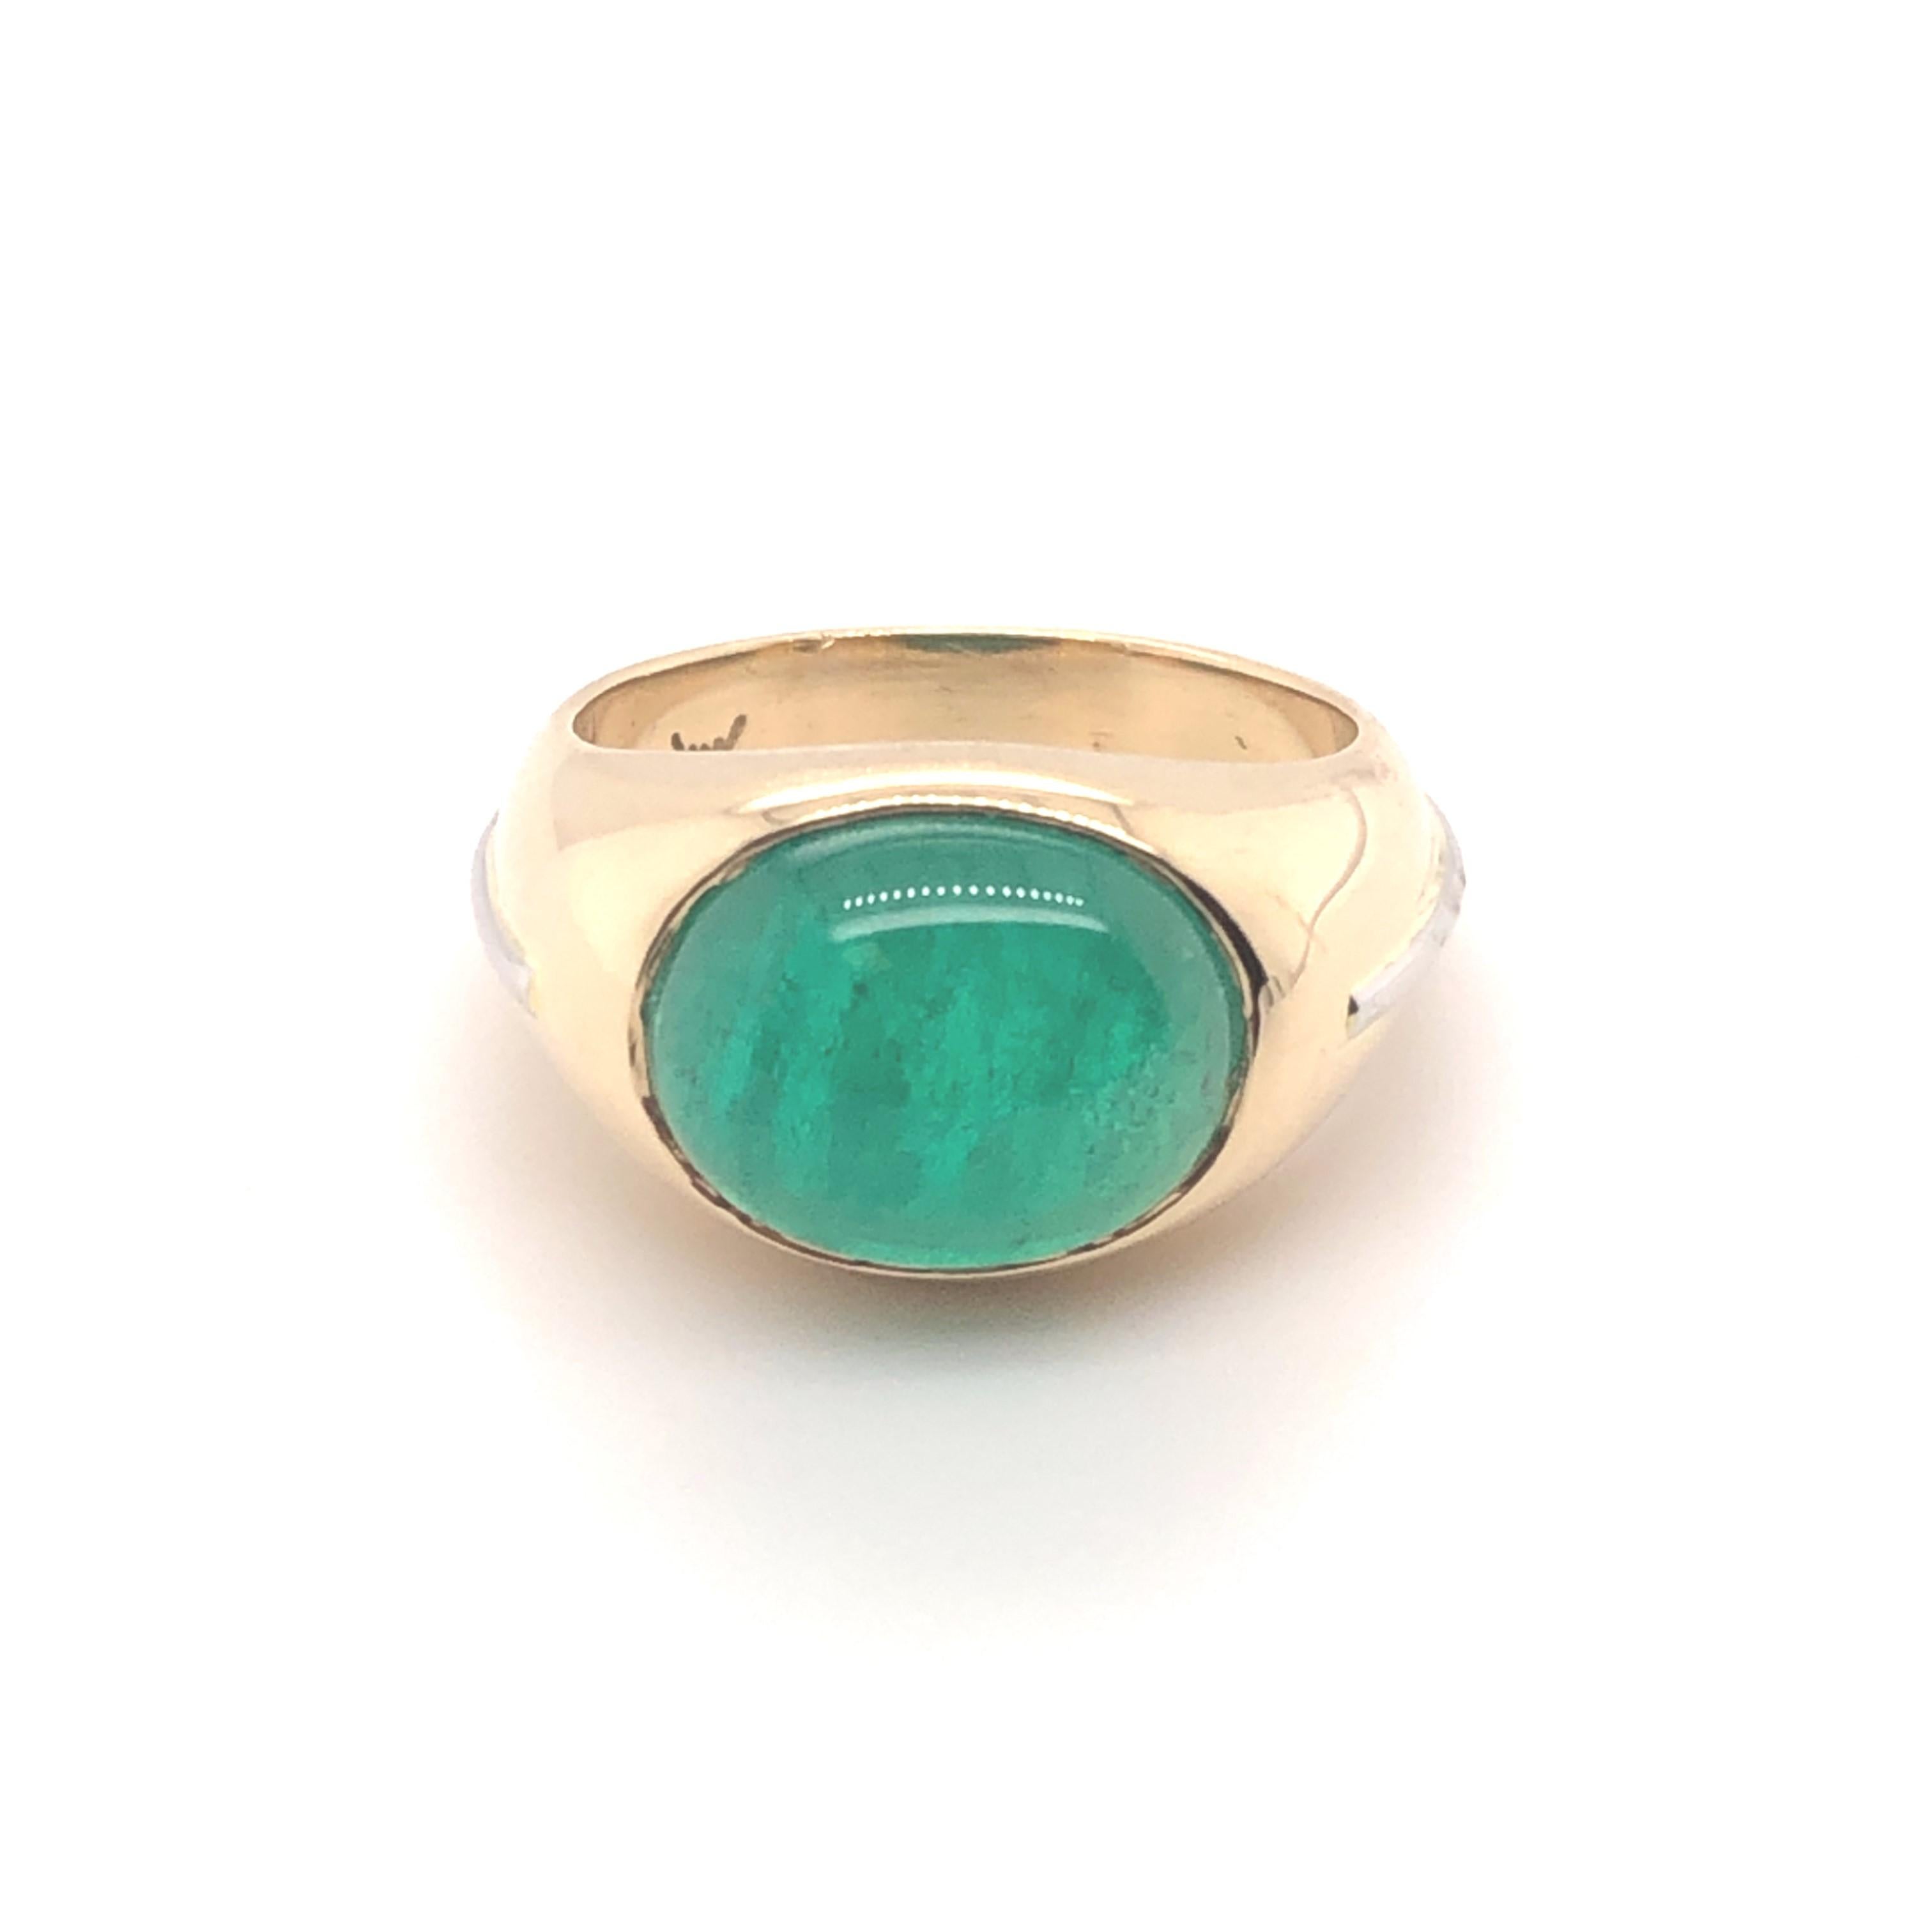 Cabochon AGL Certified 5.11 Carat Colombian Emerald Ring in 18 Karat Gold and Platinum